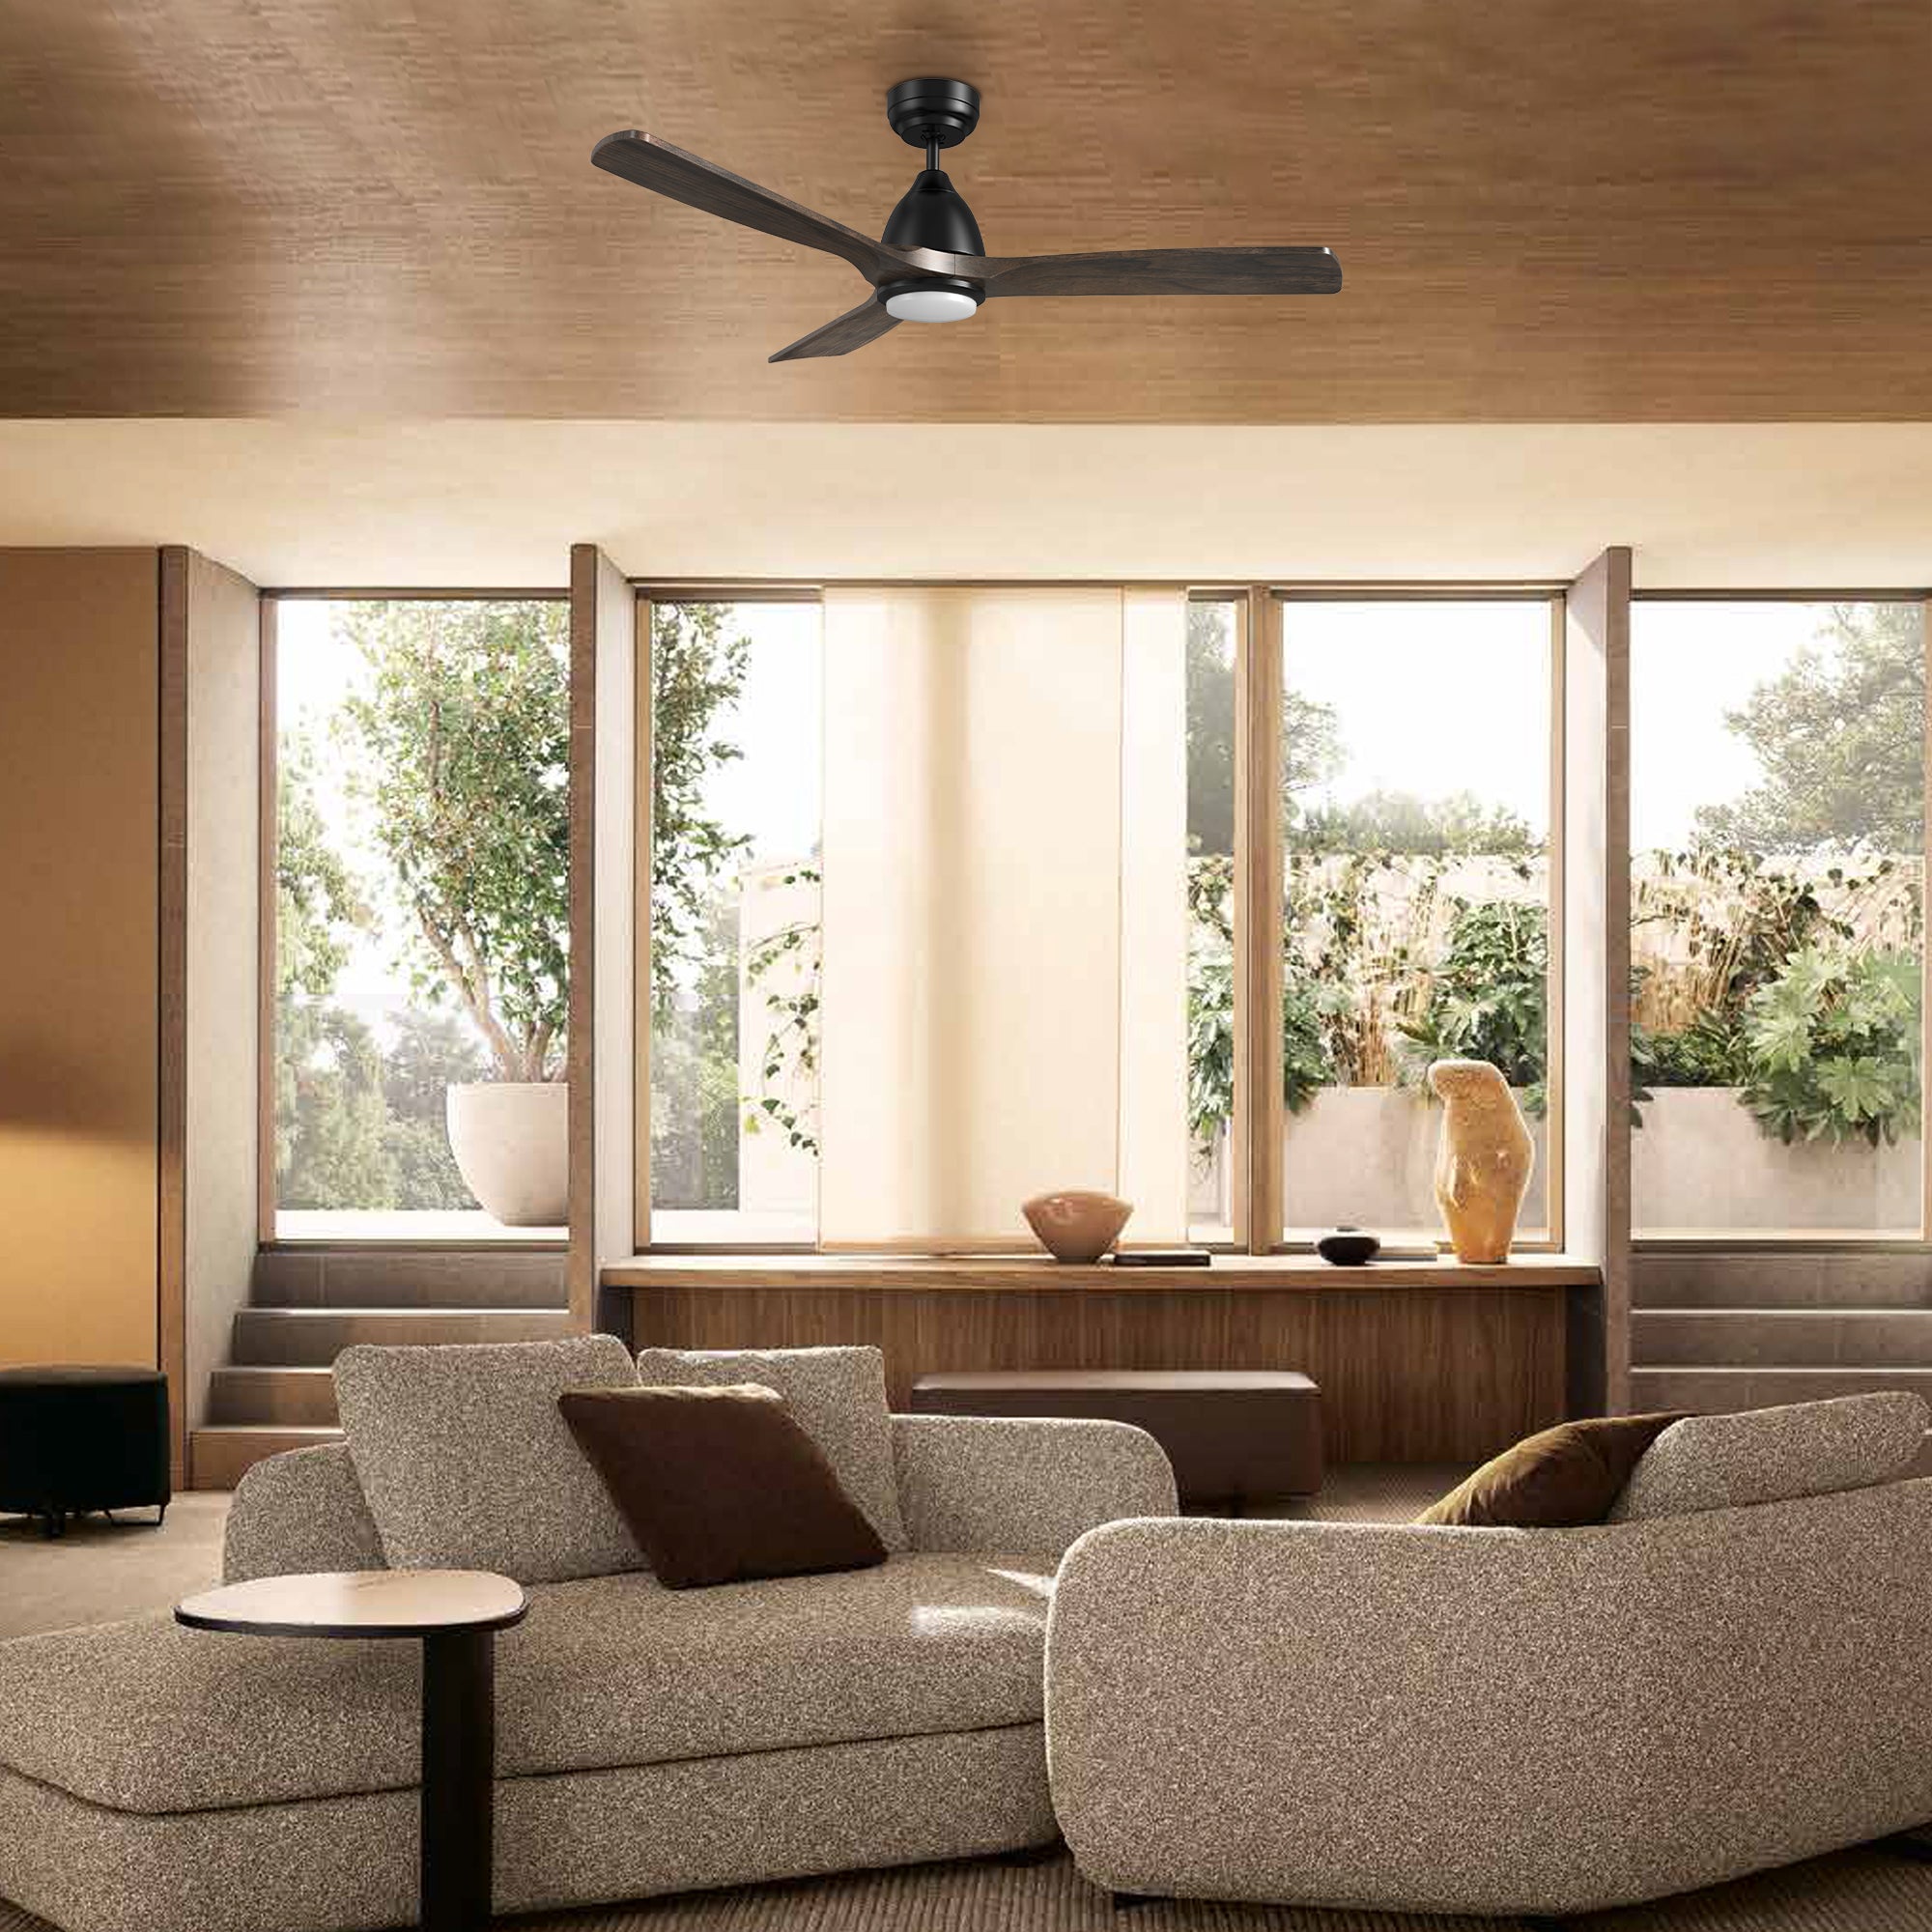 This Sawyer 48&#39;&#39; smart ceiling fan keeps your space cool, bright, and stylish. It is a soft modern masterpiece perfect for your large indoor living spaces. This Wifi smart ceiling fan is a simplicity designing with Black finish, use elegant Solid Wood blades and has an integrated 4000K LED daylight. The fan features Remote control, Wi-Fi apps, Siri Shortcut and Voice control technology (compatible with Amazon Alexa and Google Home Assistant ) to set fan preferences.